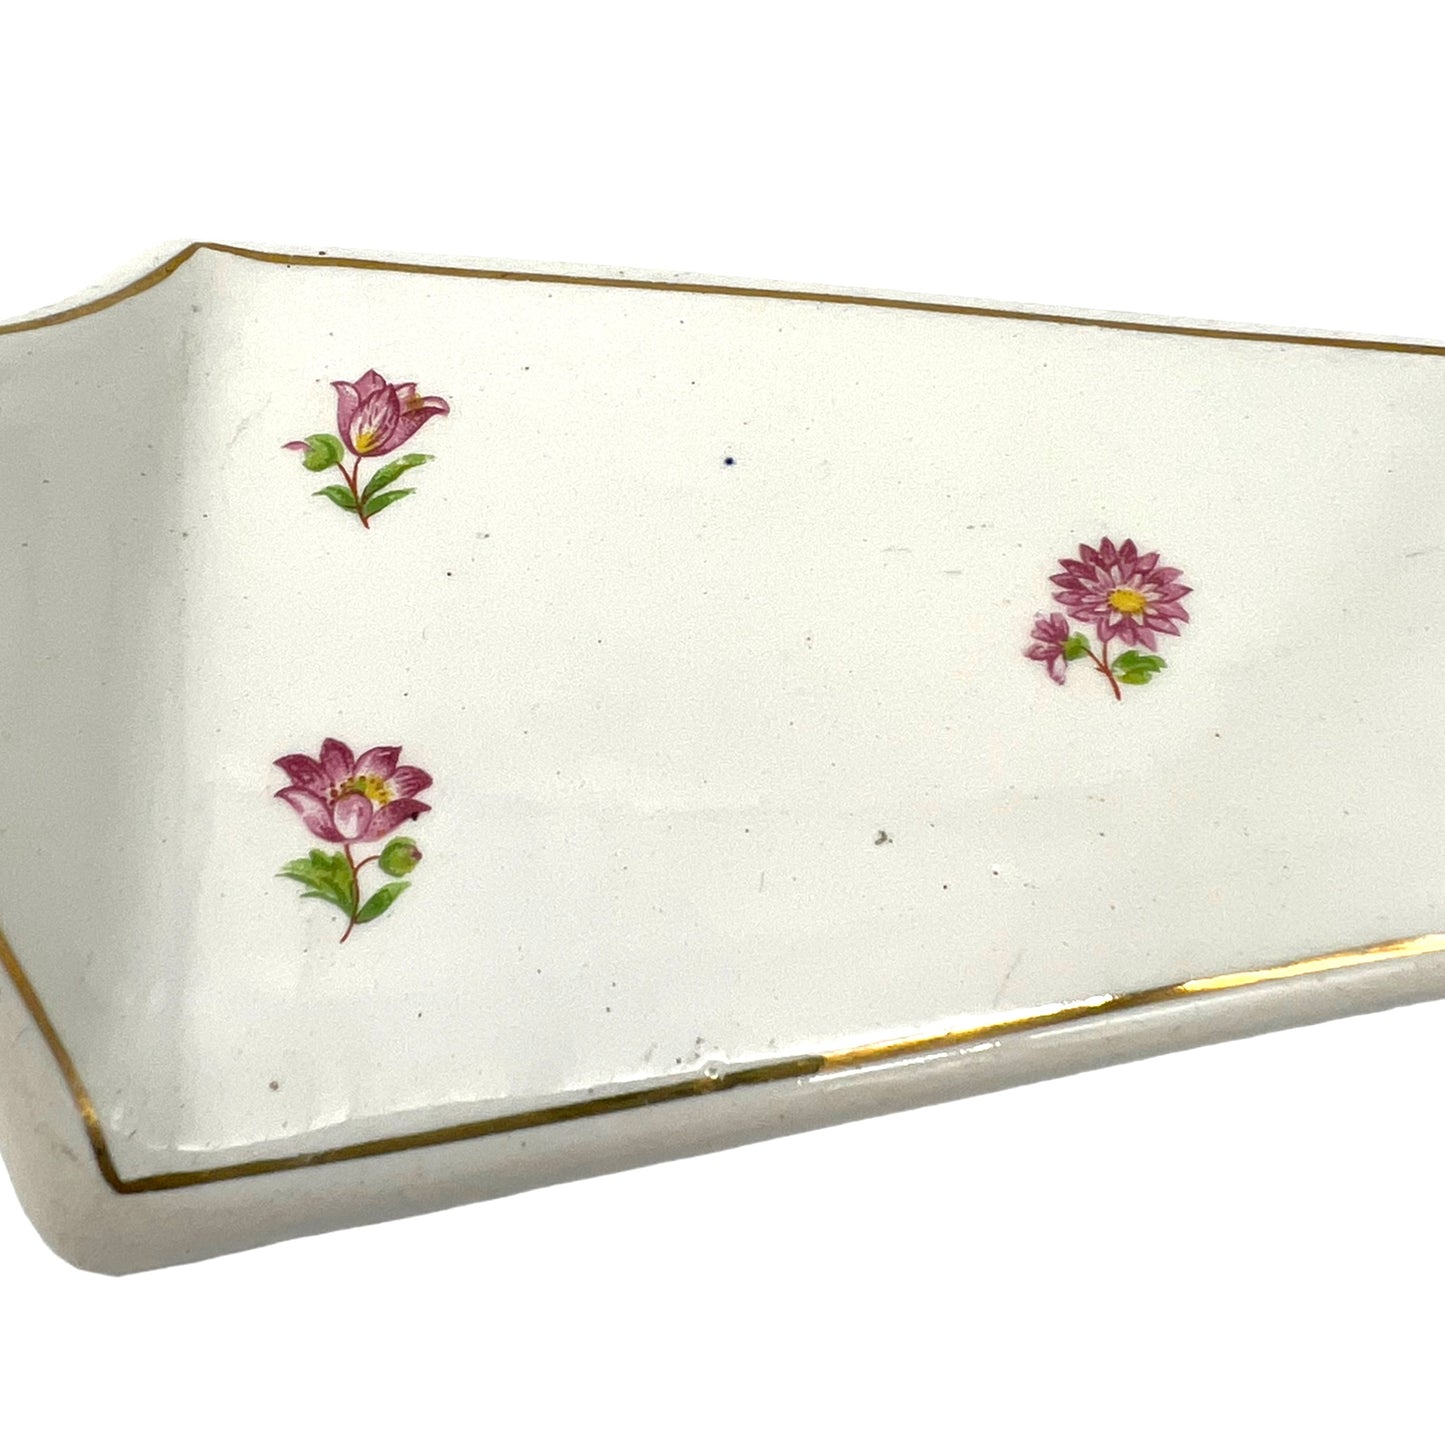 image 12 French porcelain cake server sold by All Things French Store